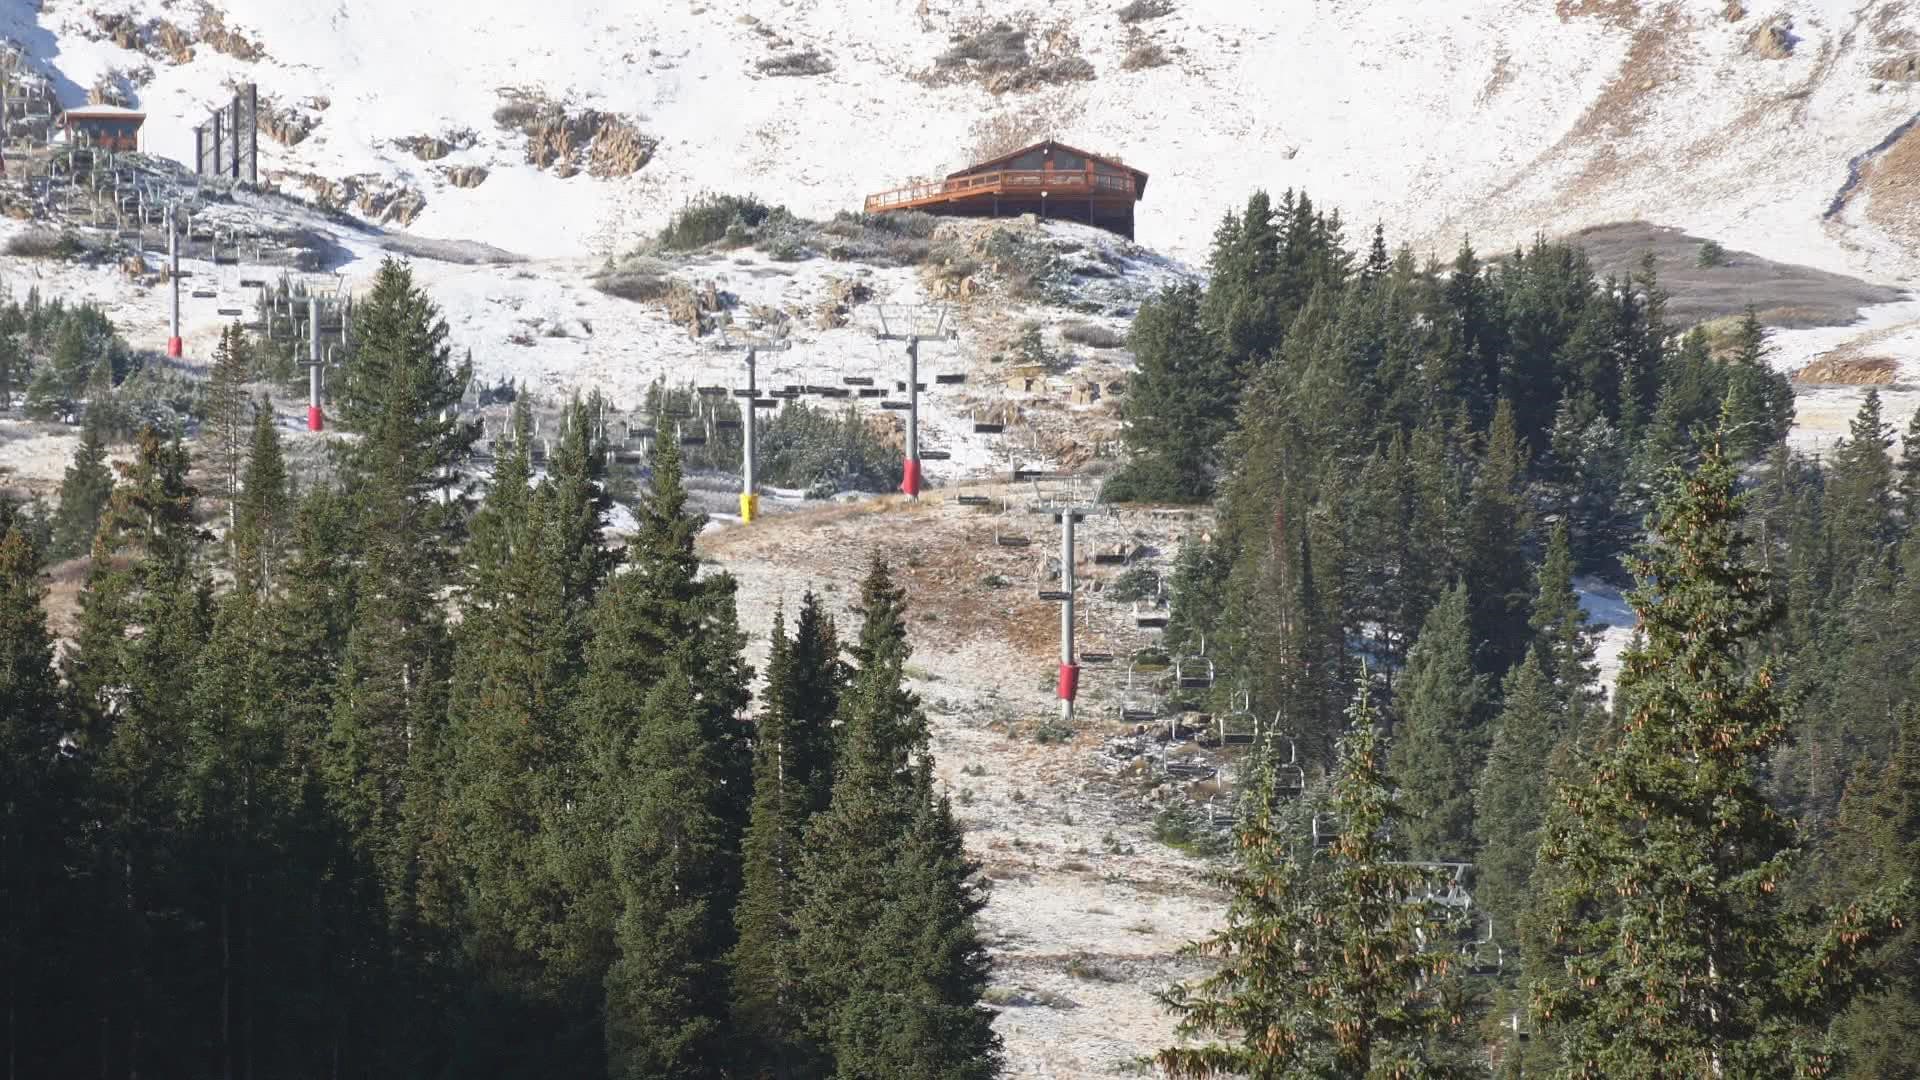 The Loveland Ski Area is finishing up work on a new ski lodge at Loveland Valley and replacing Chair 6 with a new lift.